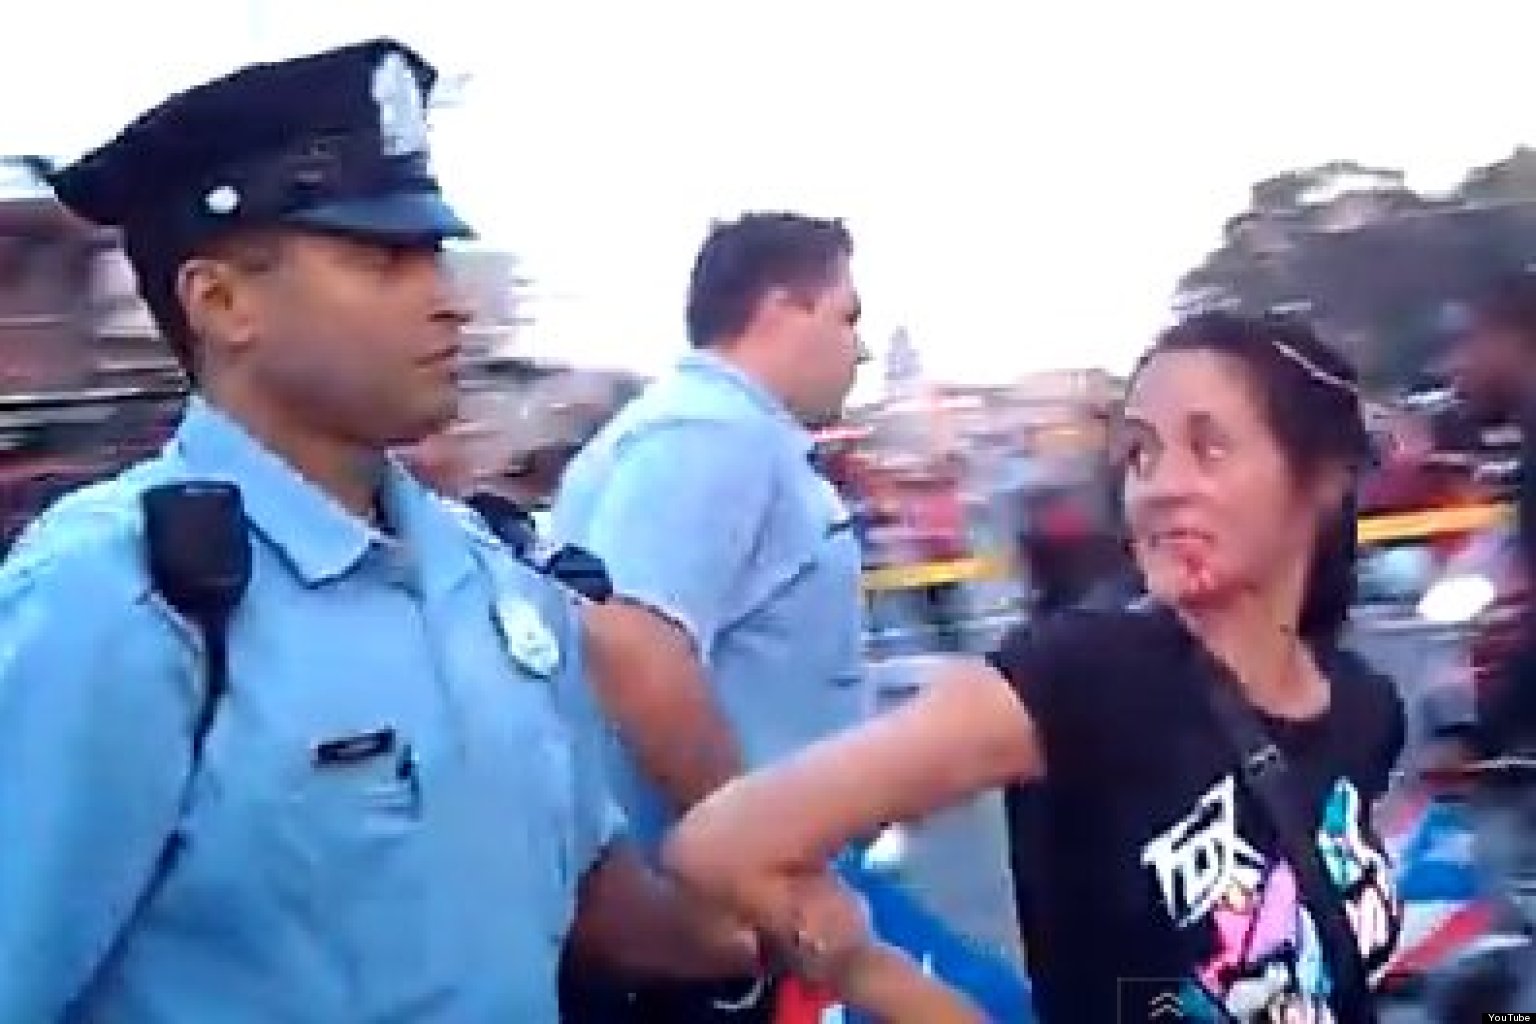 Philadelphia Police Officer Appears To Punch Arrest Woman After Puerto Rican Day Parade 2012